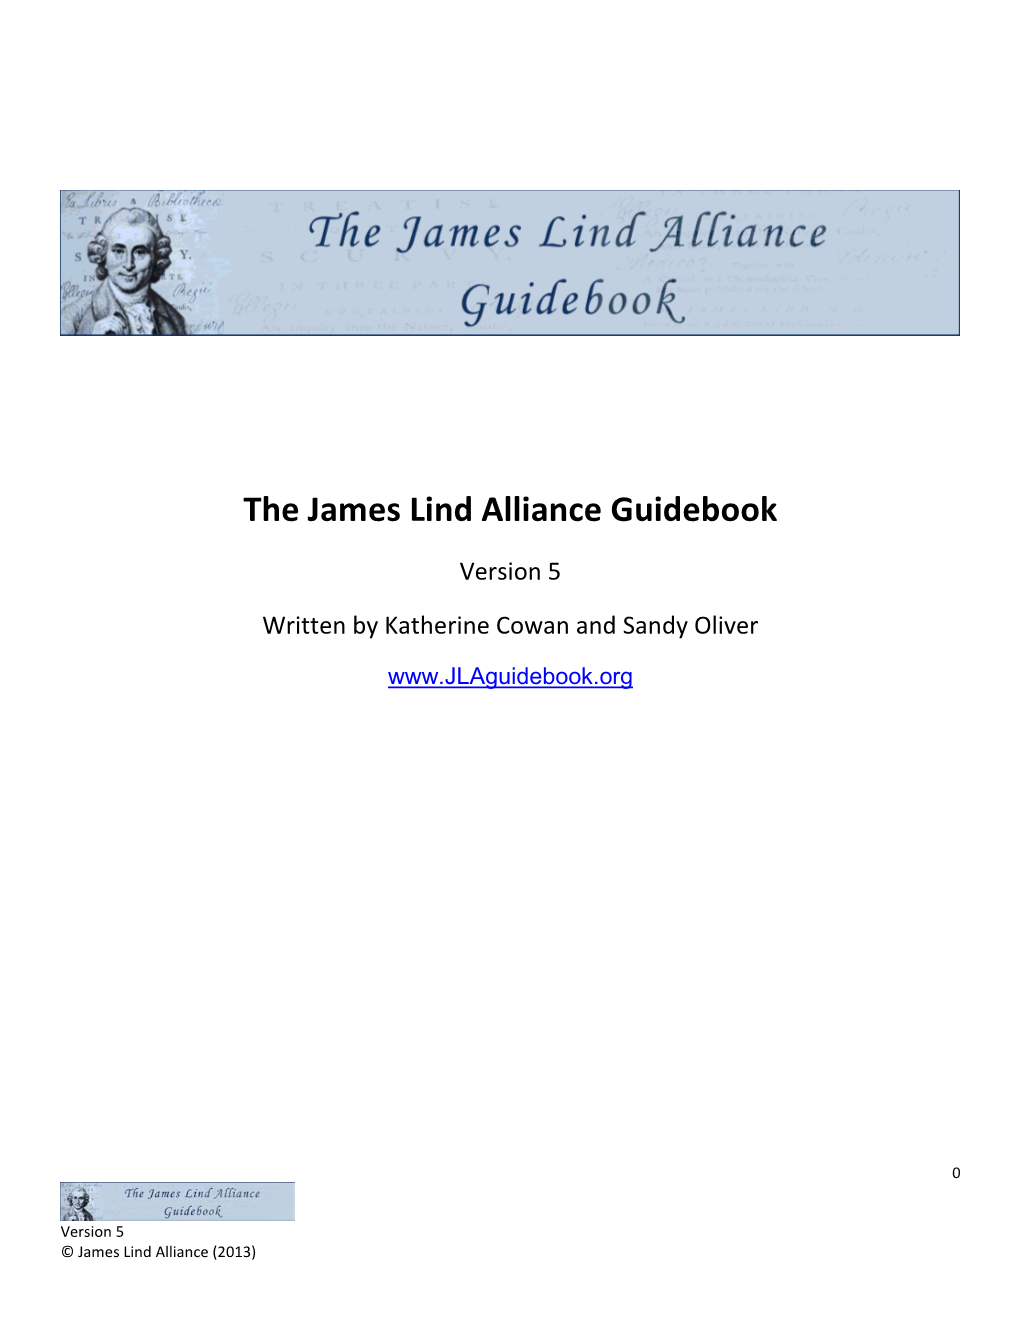 The James Lind Alliance Guidebook